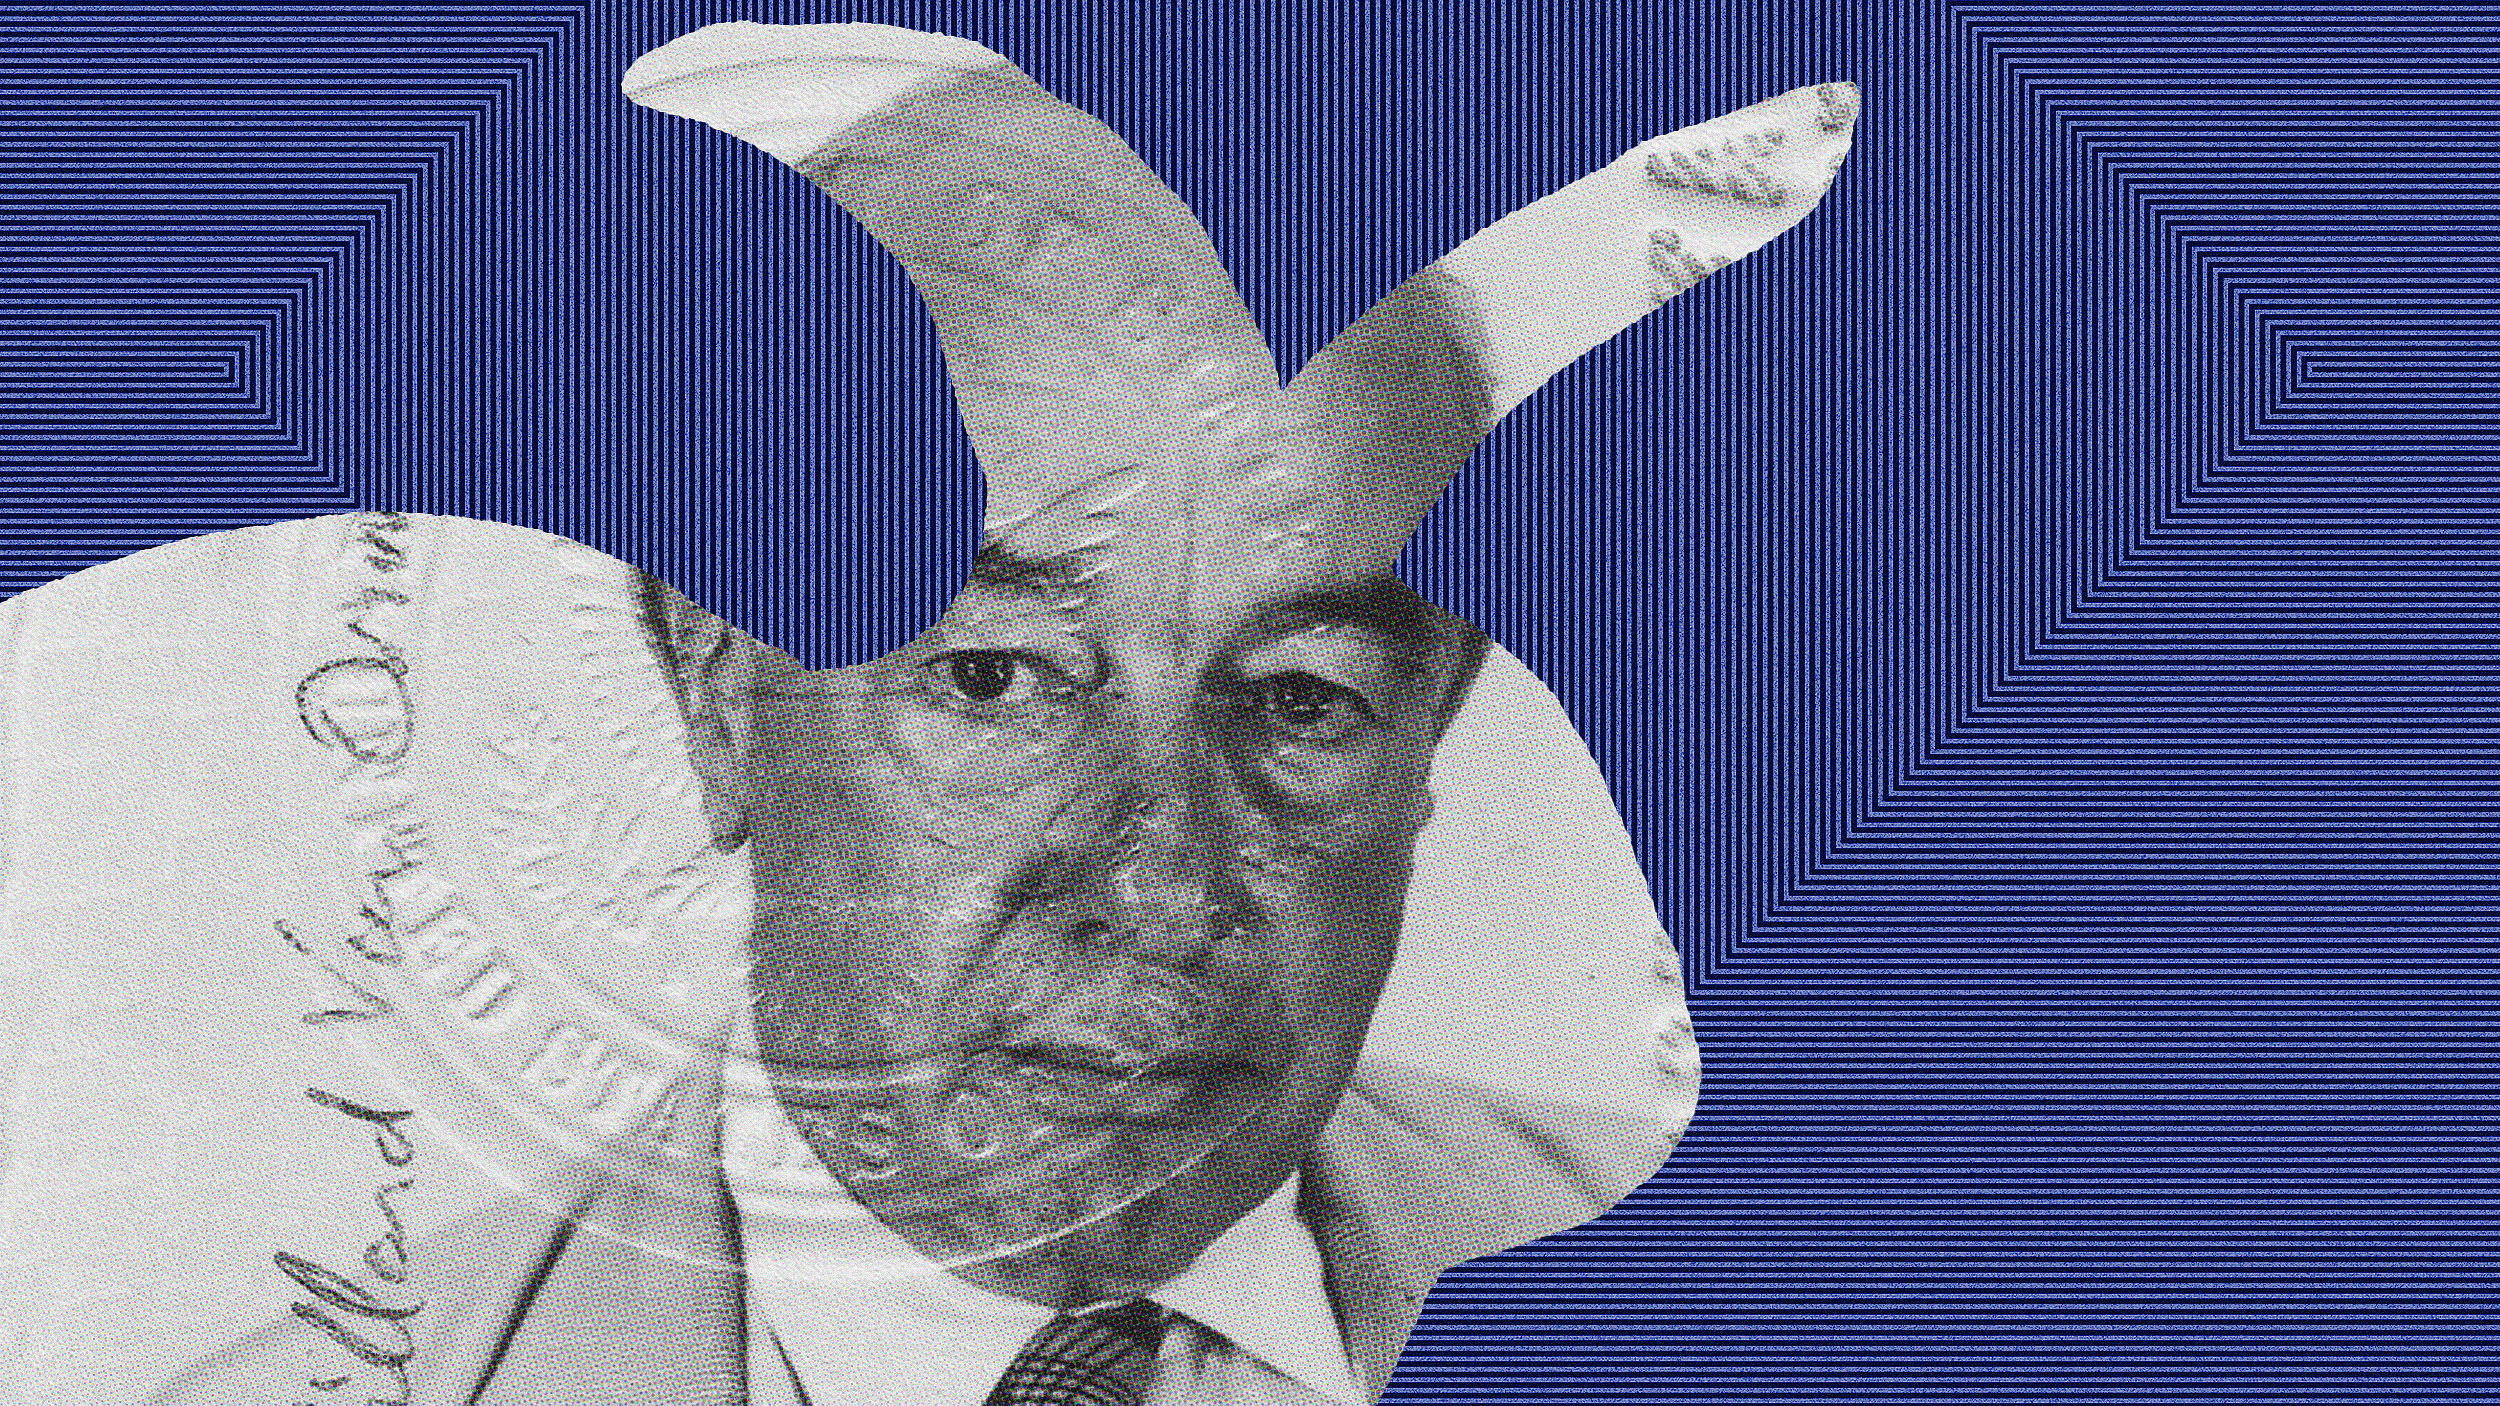 Collage of a man's face superimposed on a graphic background with geometric patterns and abstract white shapes overlaying his image, symbolizing better communication.